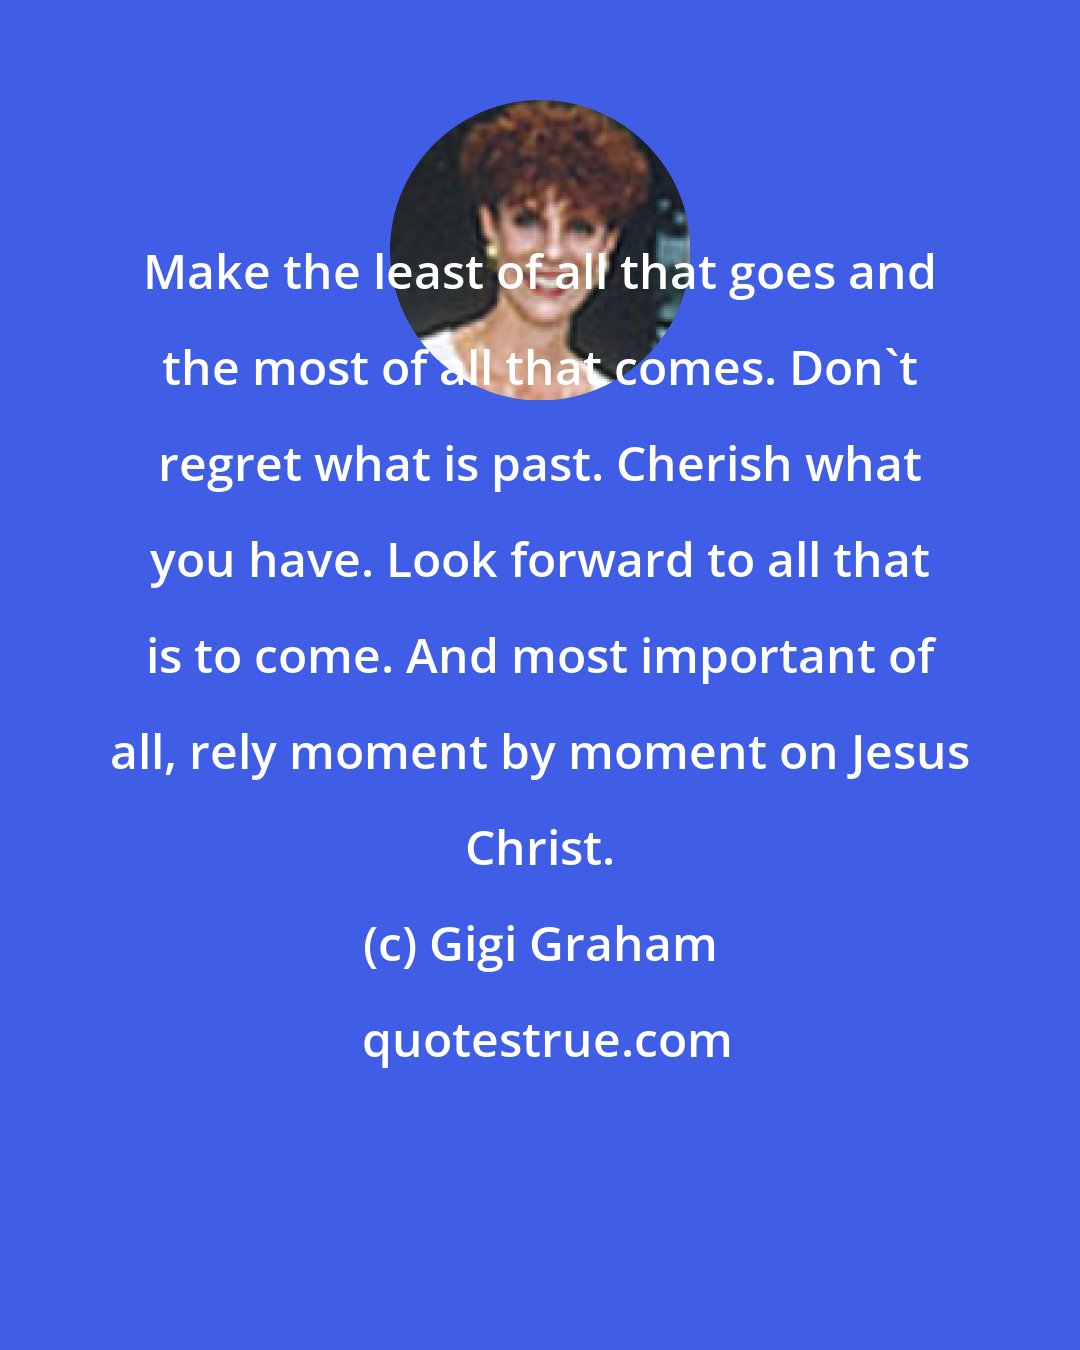 Gigi Graham: Make the least of all that goes and the most of all that comes. Don't regret what is past. Cherish what you have. Look forward to all that is to come. And most important of all, rely moment by moment on Jesus Christ.